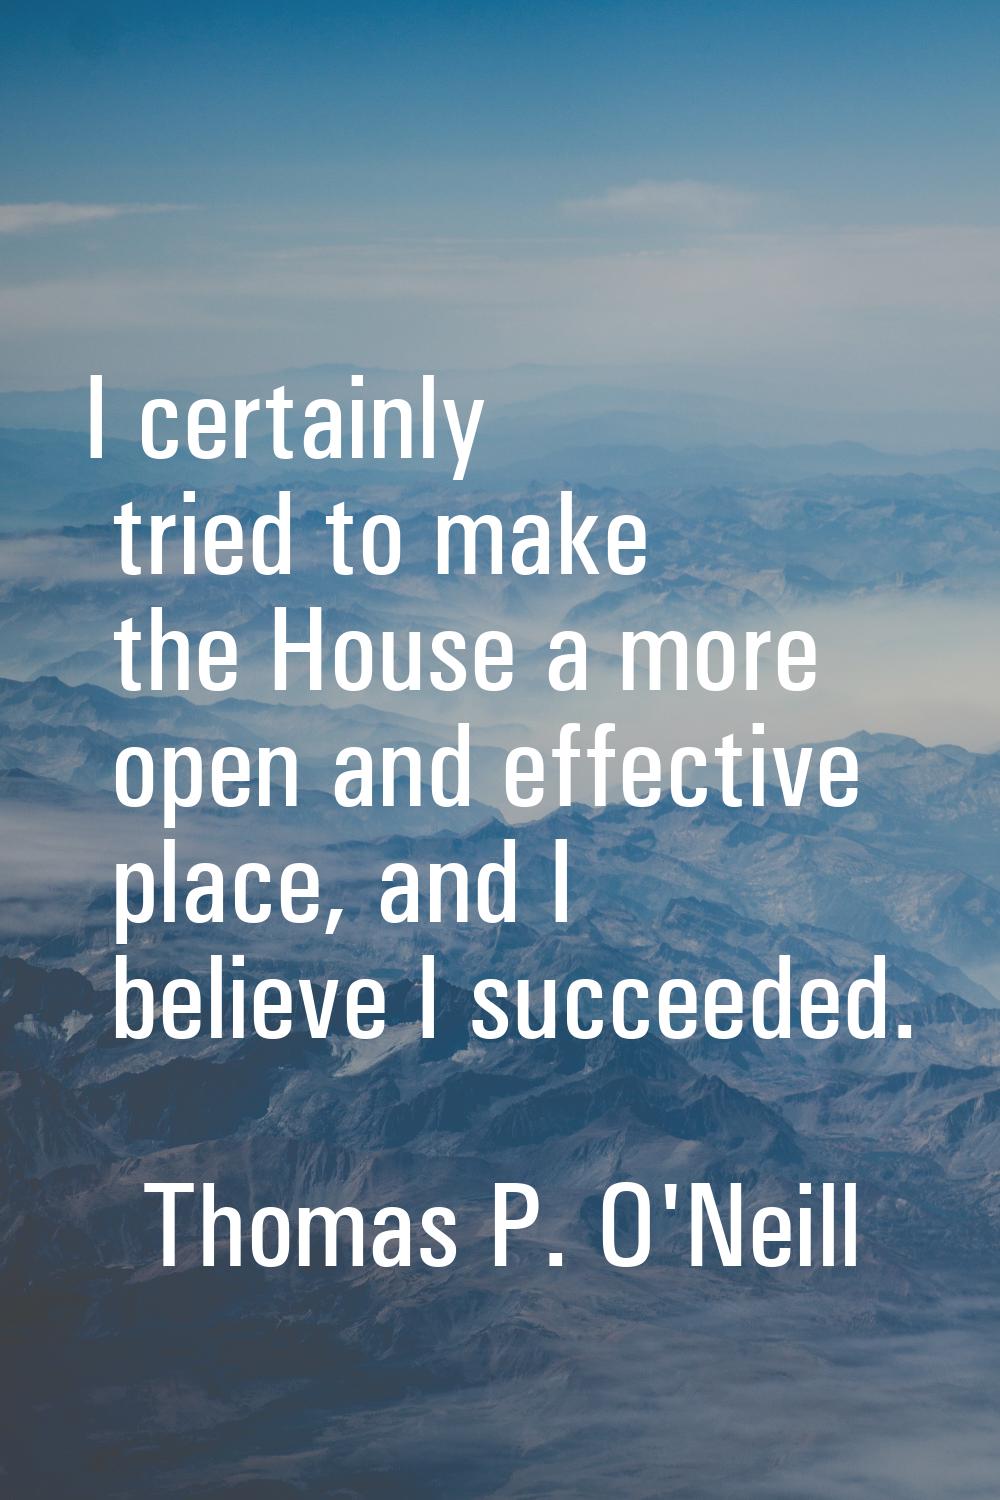 I certainly tried to make the House a more open and effective place, and I believe I succeeded.